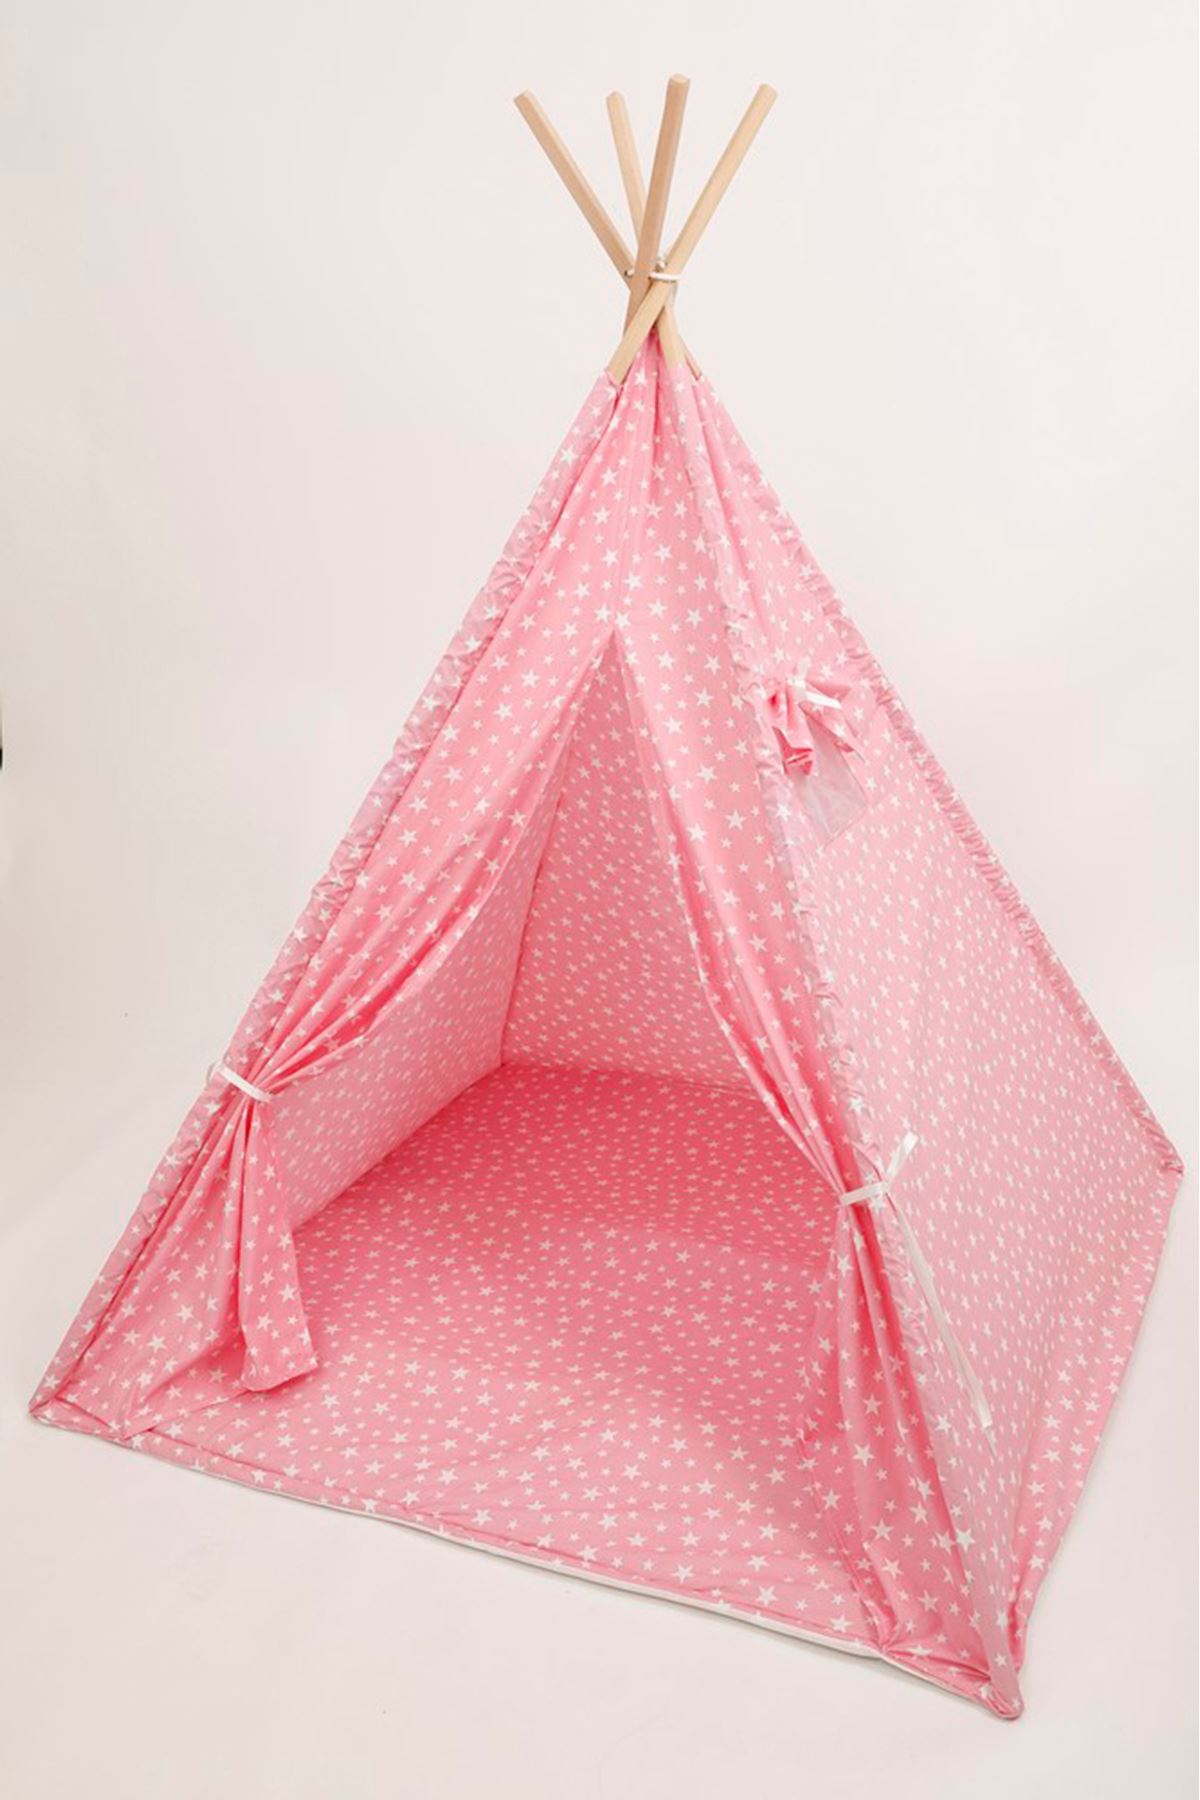 Play Tent "Pink Star"